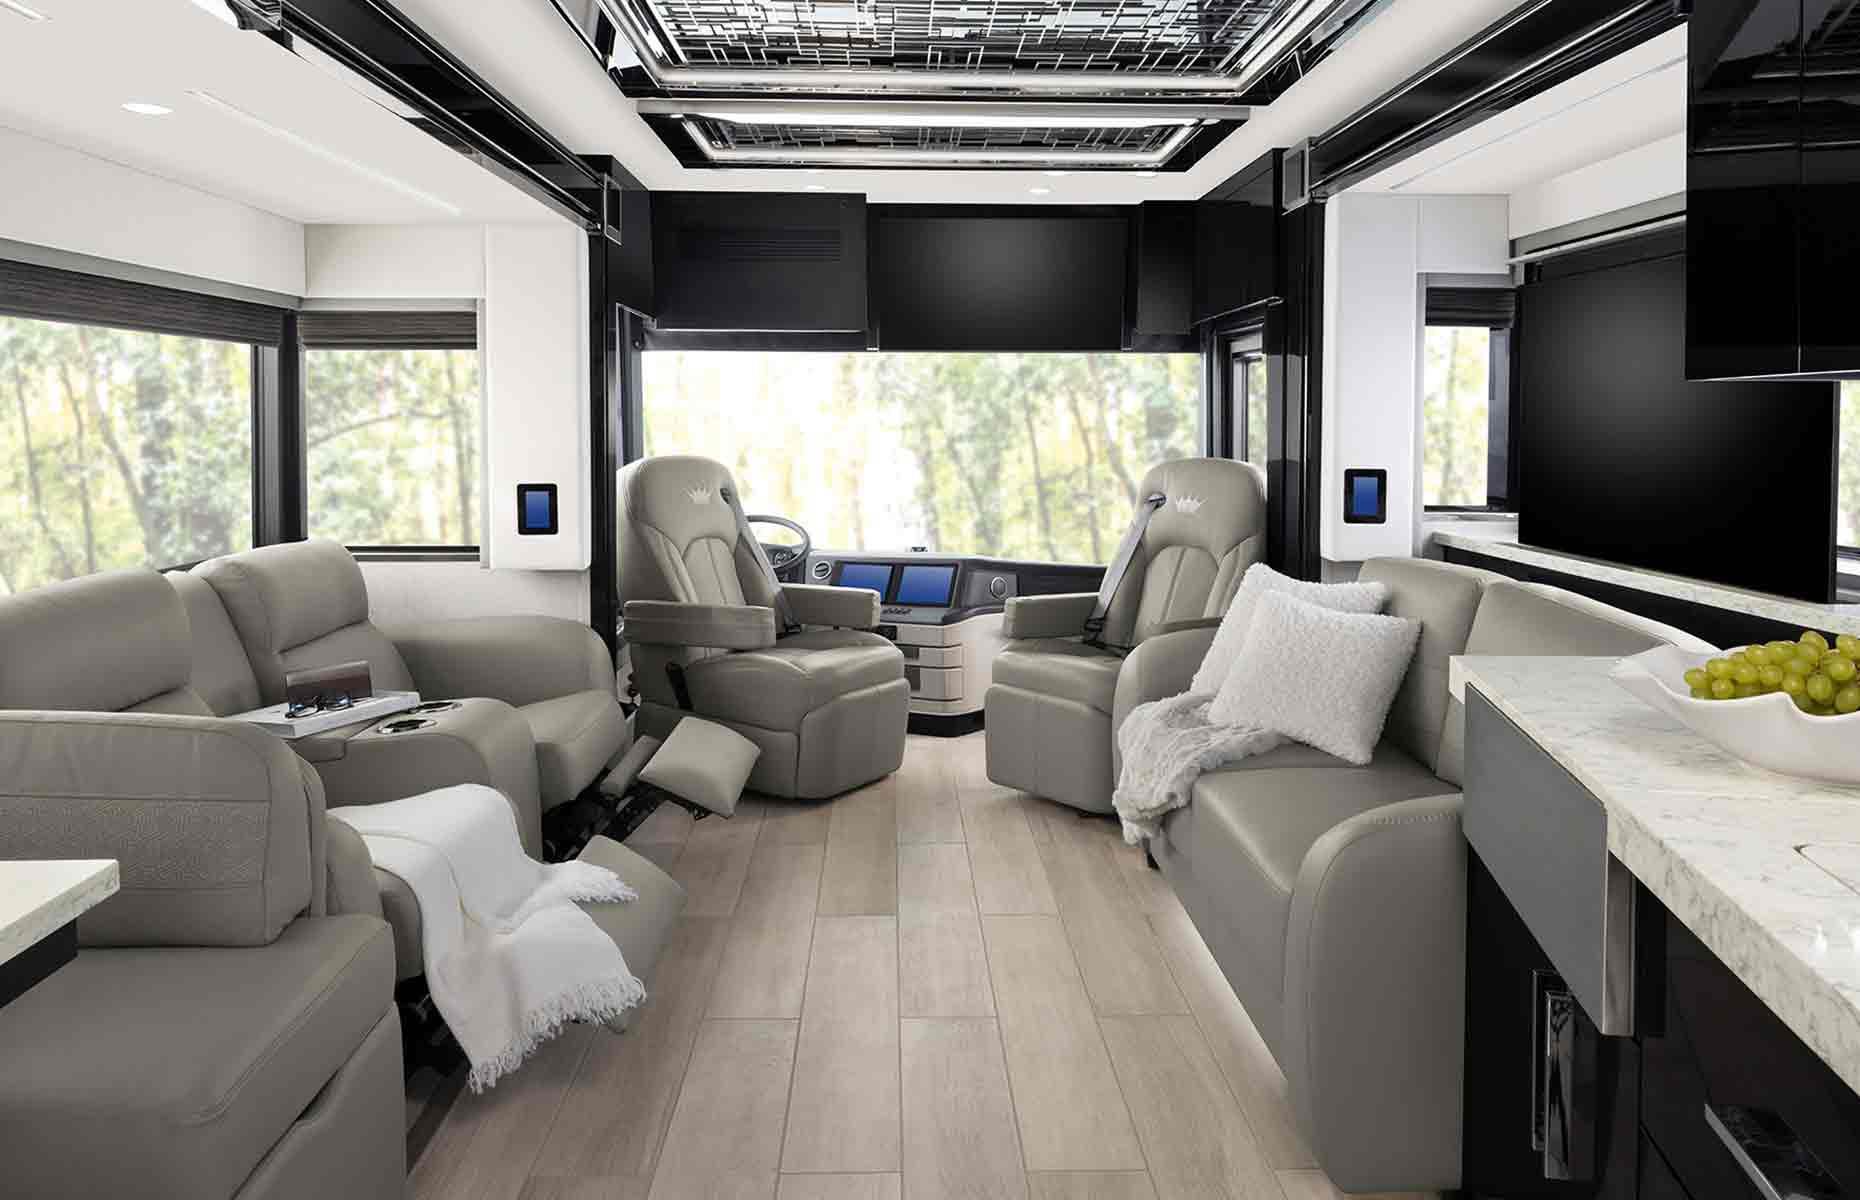 <p>The chic coach is 45 feet long and is the firm’s flagship vehicle, offering the ultimate digs for millionaire explorers.</p>  <p>With a starting price of $1.6 million, there are four floor plans to choose from and the design is fully customizable, from the exterior paintwork, which comes in 10 different styles, right through to the kitchen cabinets. Plus, it features some of the most jaw-dropping features money can buy.</p>